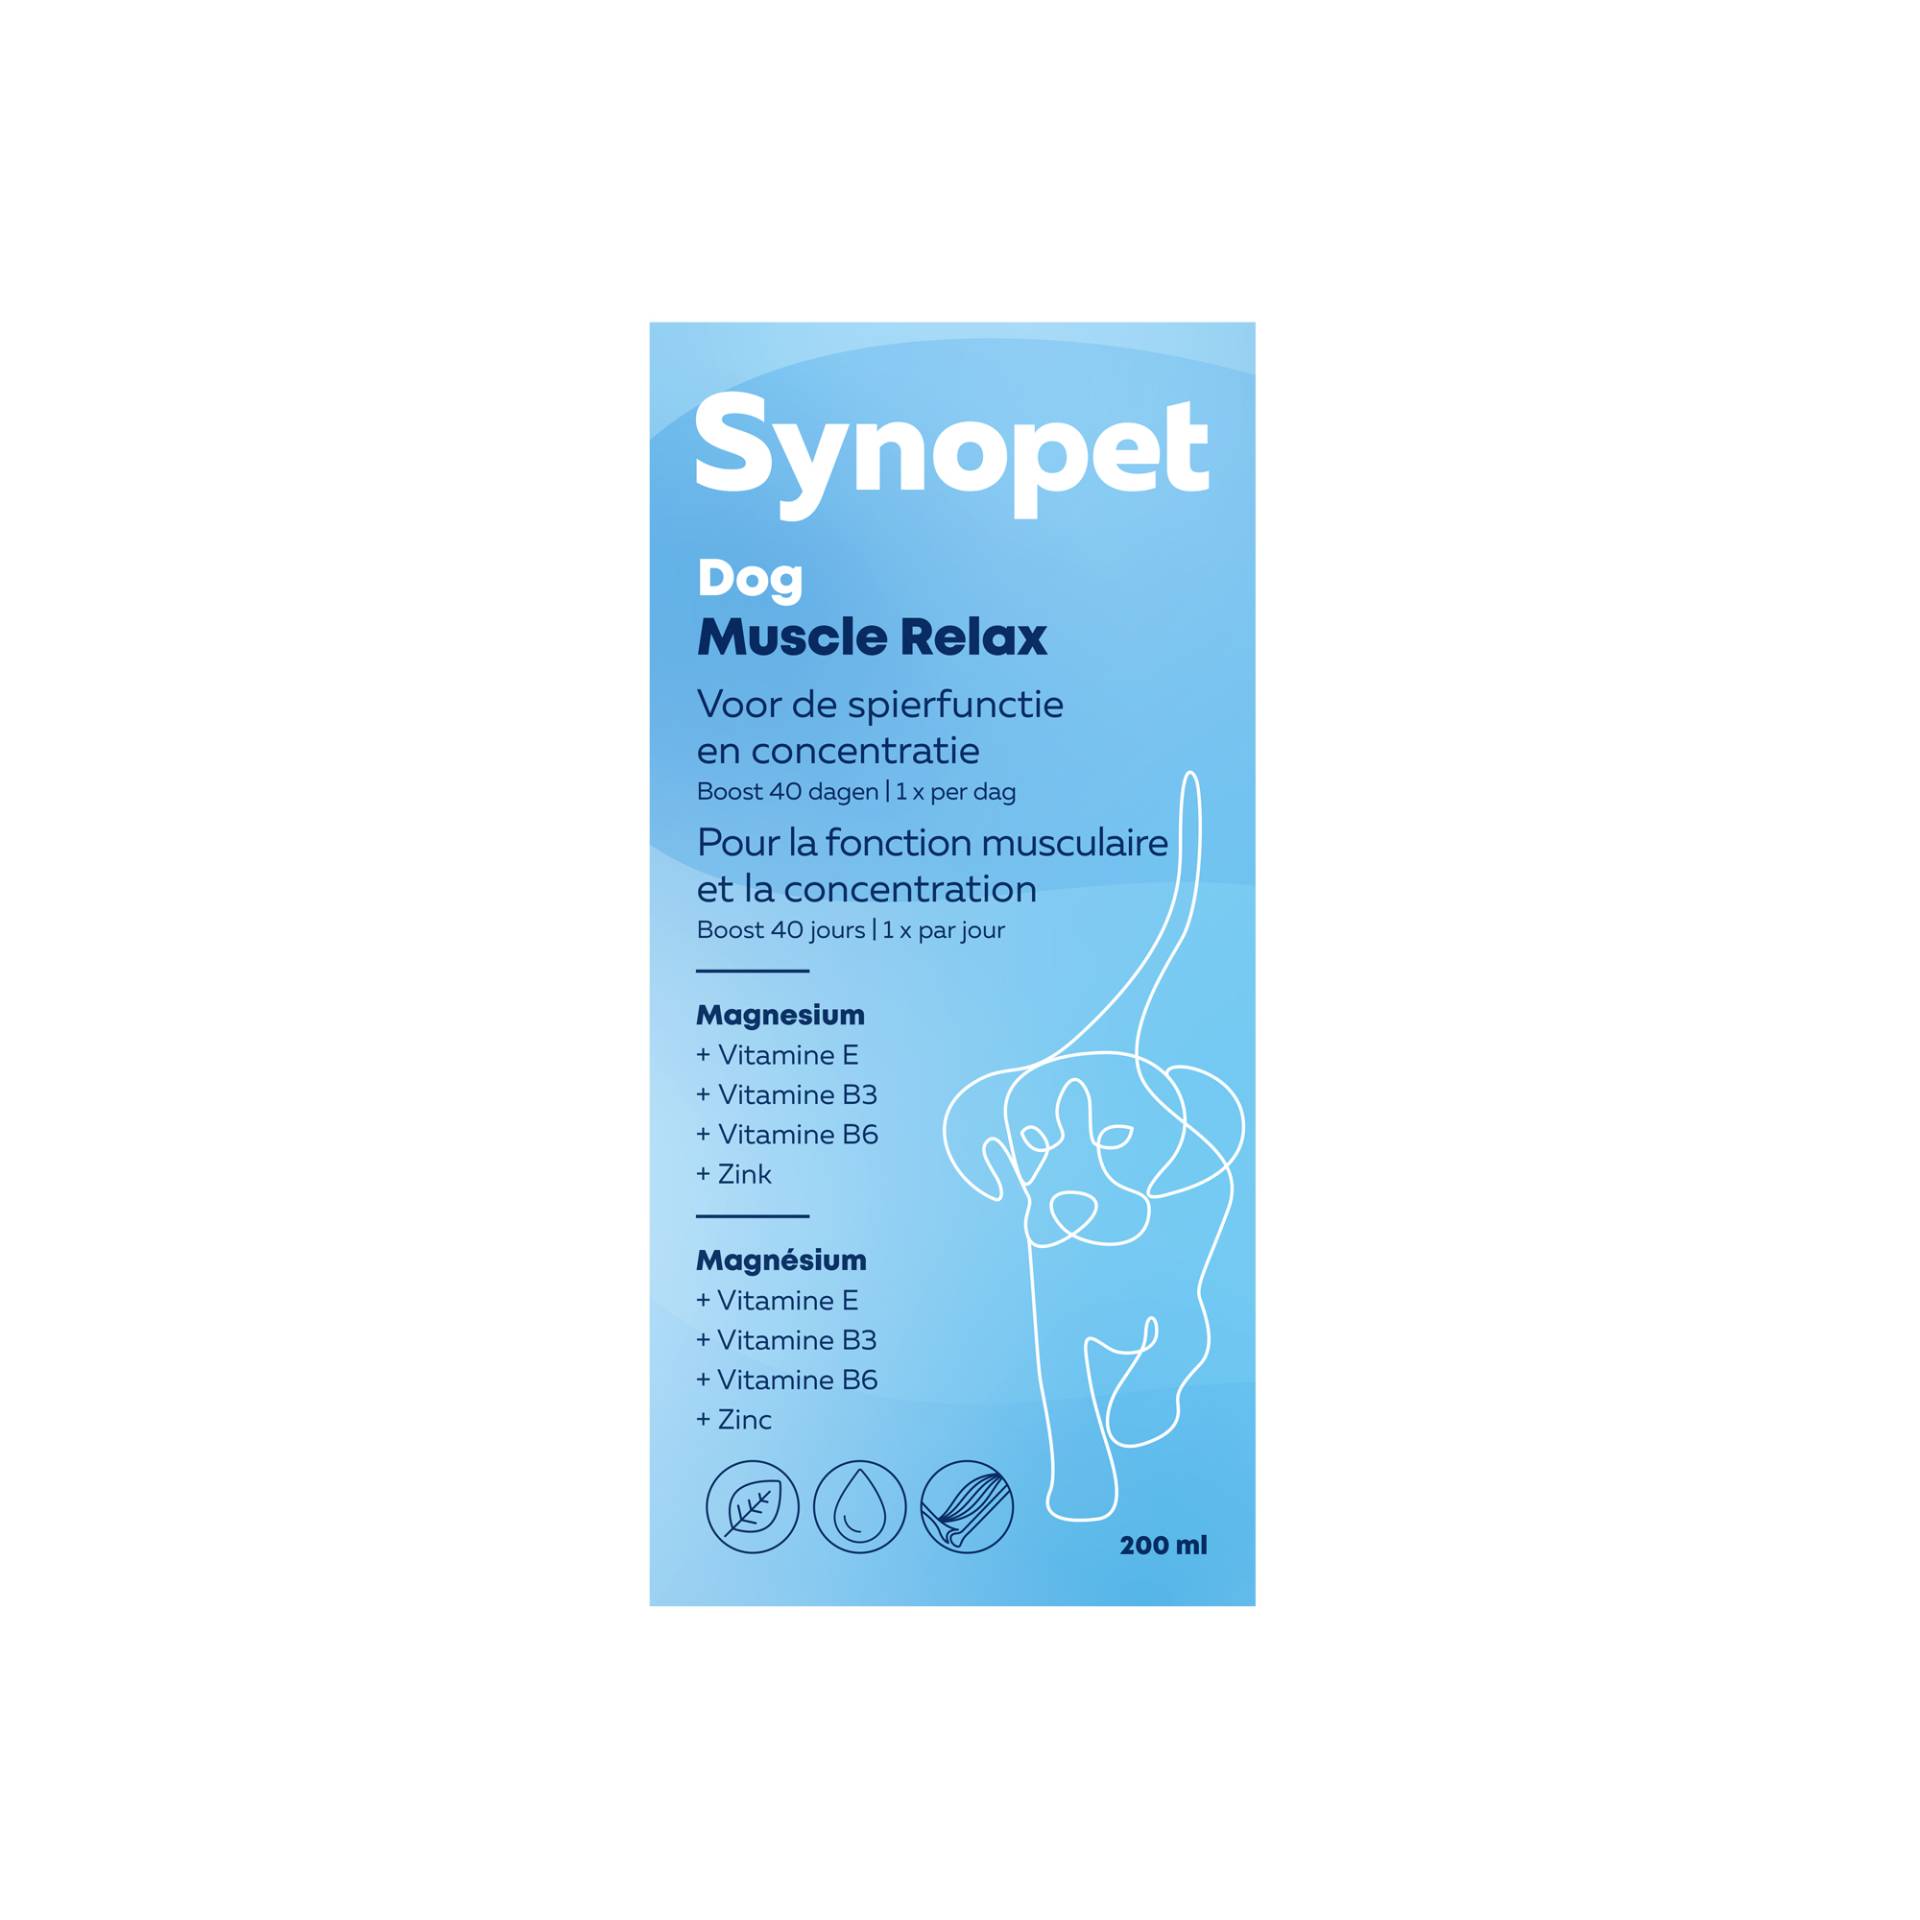 Synopet Muscle Relax Dog - 200 ml von Synopet